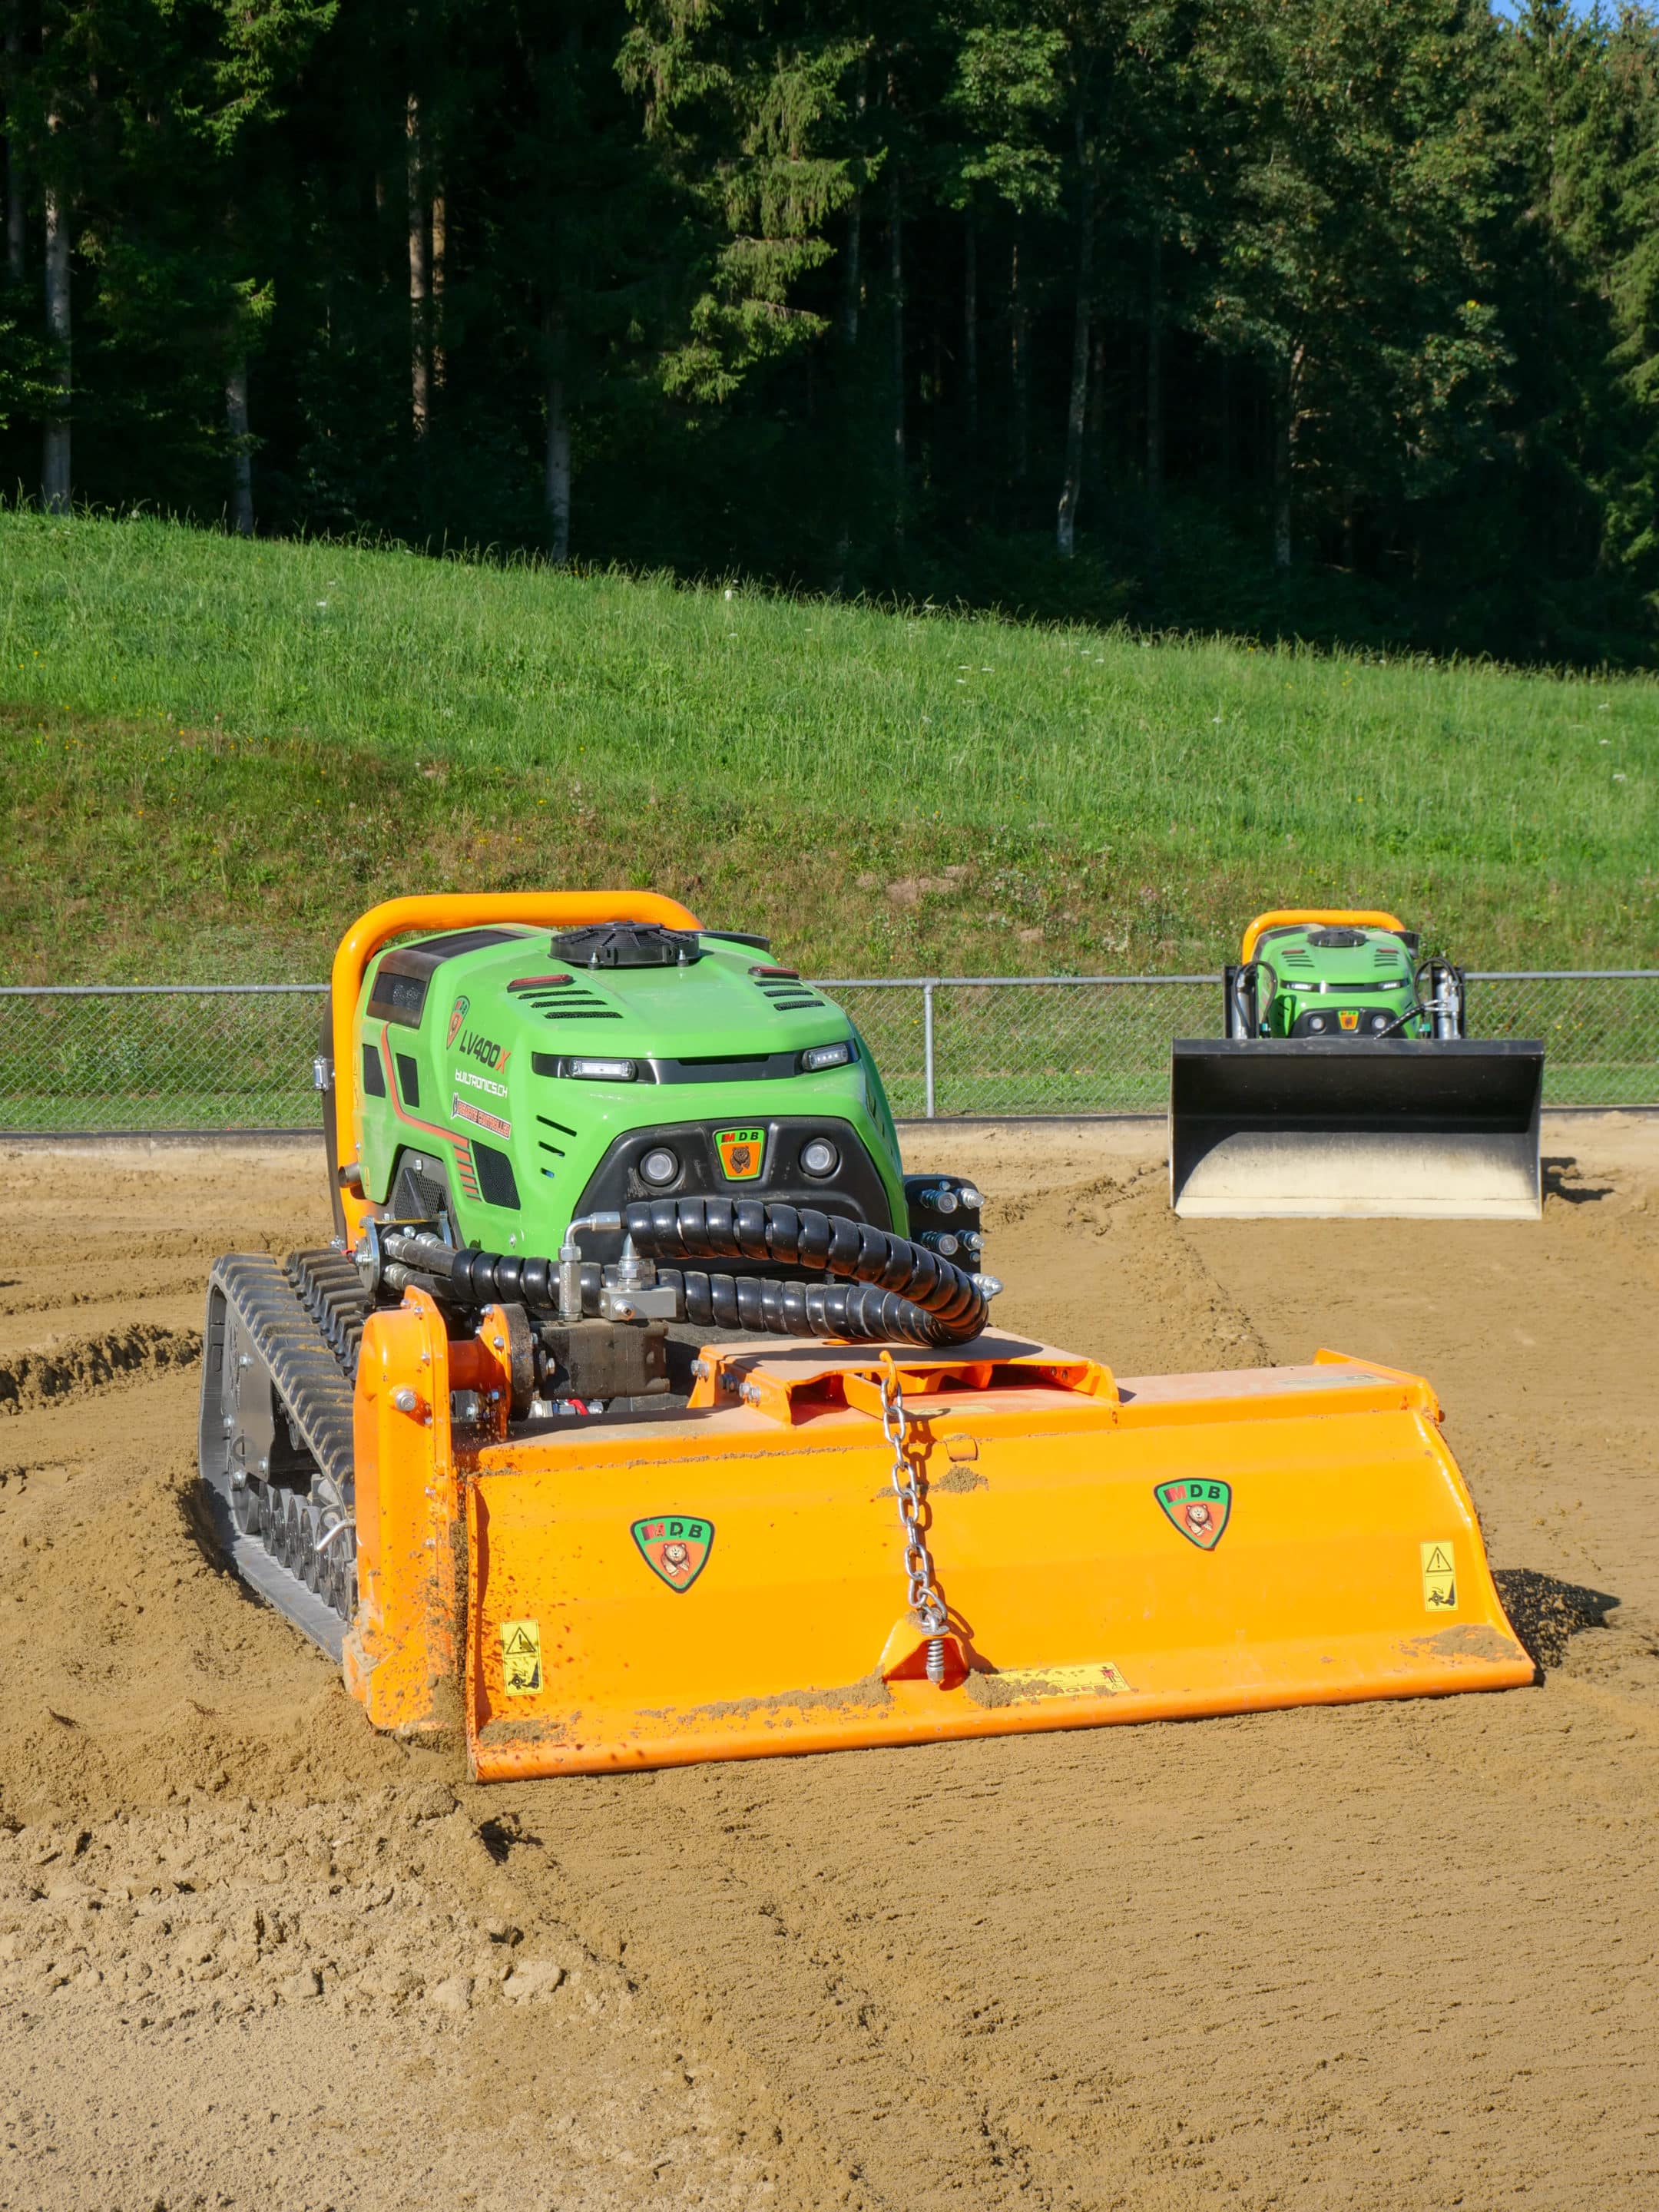 Beach Volleyball with radio-controlled tractor